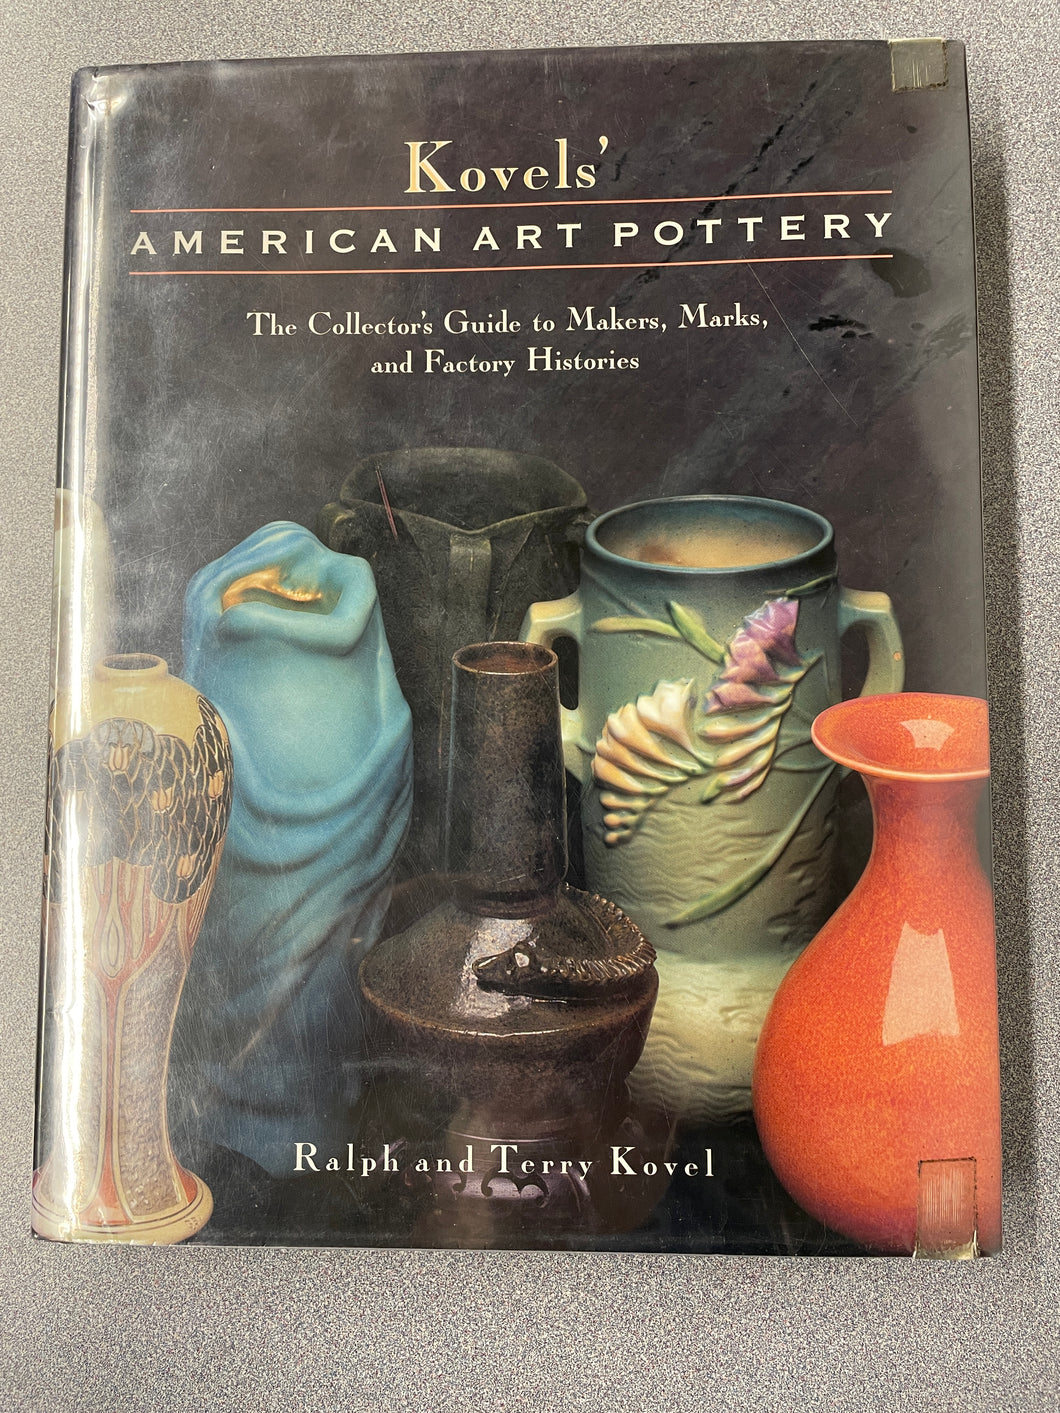 Kovels' American Art Pottery: The Collectors Guide to Makers, Marks, and Factory Histories Kovel, Ralph and Telly Kovel  [1993] VA 11/23